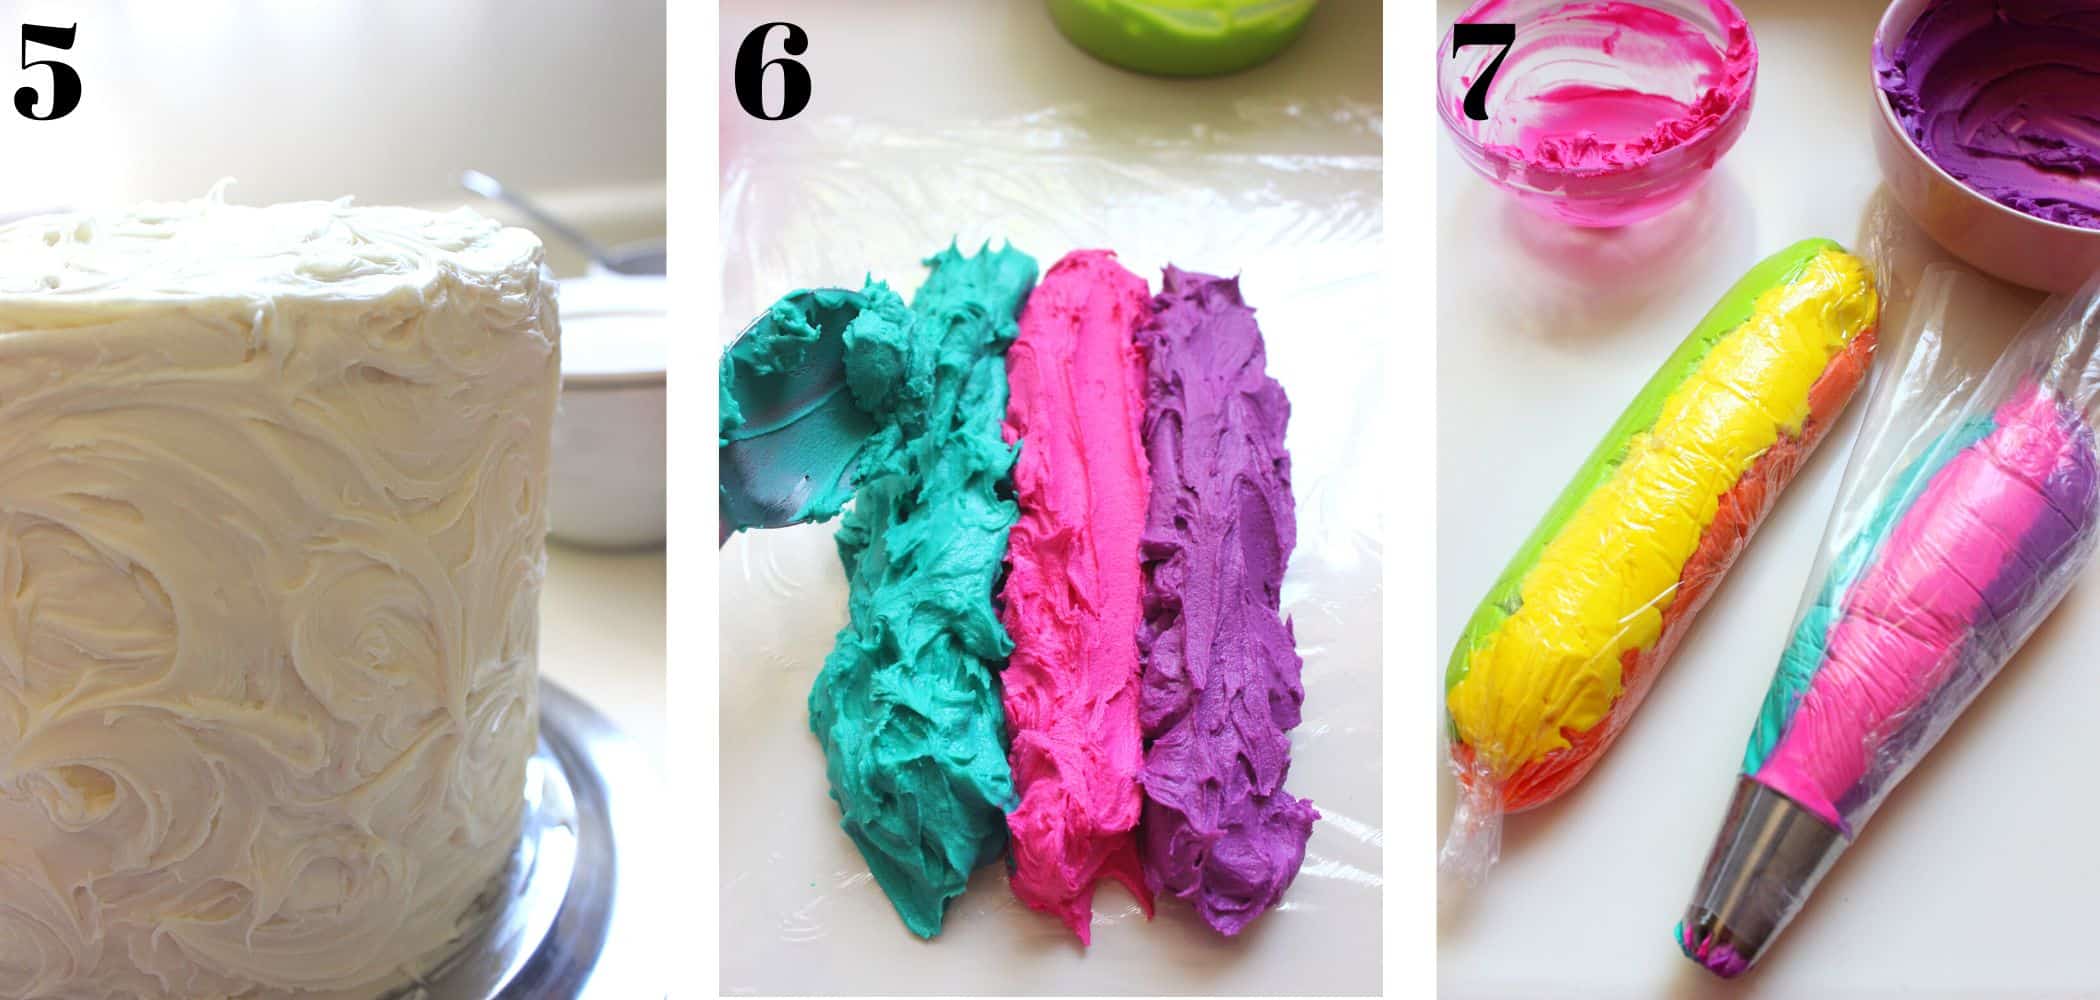 Step by step decorating the cake with vanilla buttercream and filling rainbow frosting in piping bag.